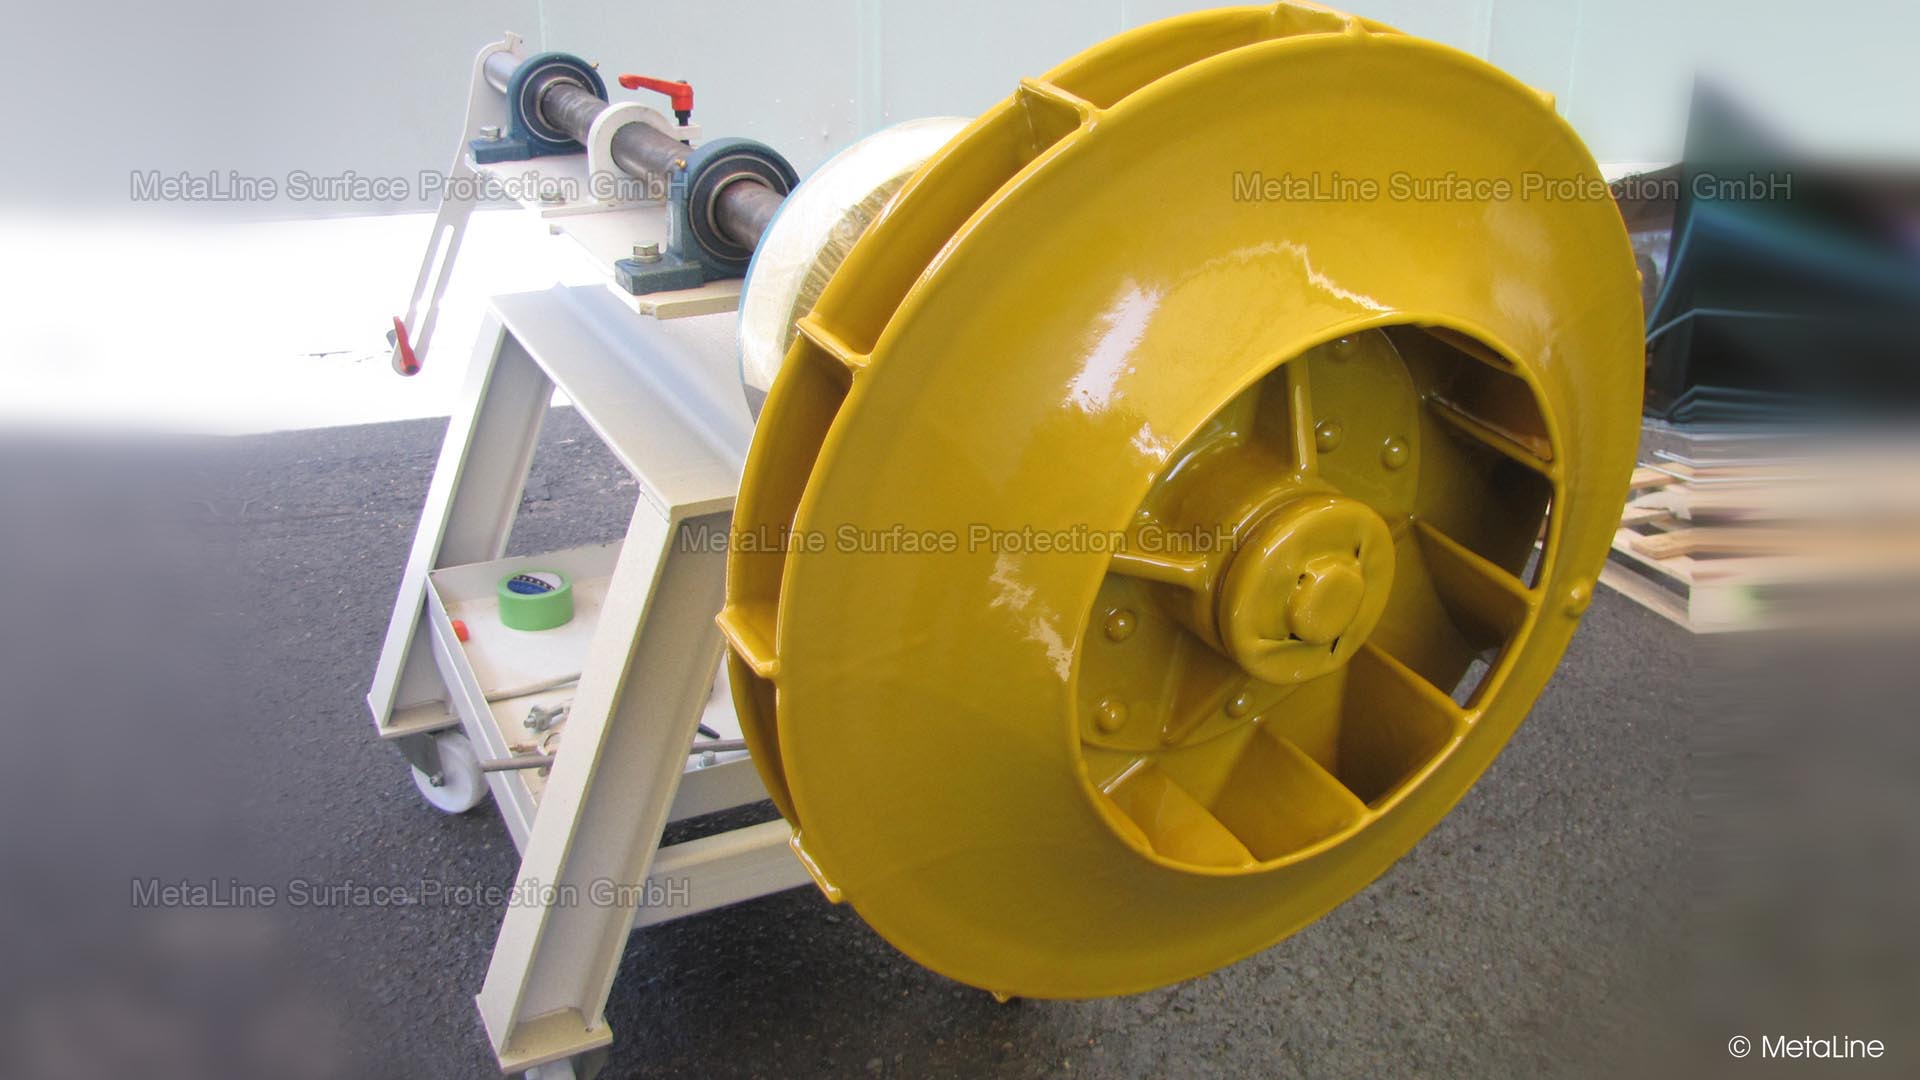 <!-- START: ConditionalContent --><!-- END: ConditionalContent -->   <!-- START: ConditionalContent --> Fan; Coating; Weight; erosion; Blade; Propeller; Rotor; Corrosion, Ventilation; Blade; Vane <!-- END: ConditionalContent -->   <!-- START: ConditionalContent --><!-- END: ConditionalContent -->   <!-- START: ConditionalContent --><!-- END: ConditionalContent --> 